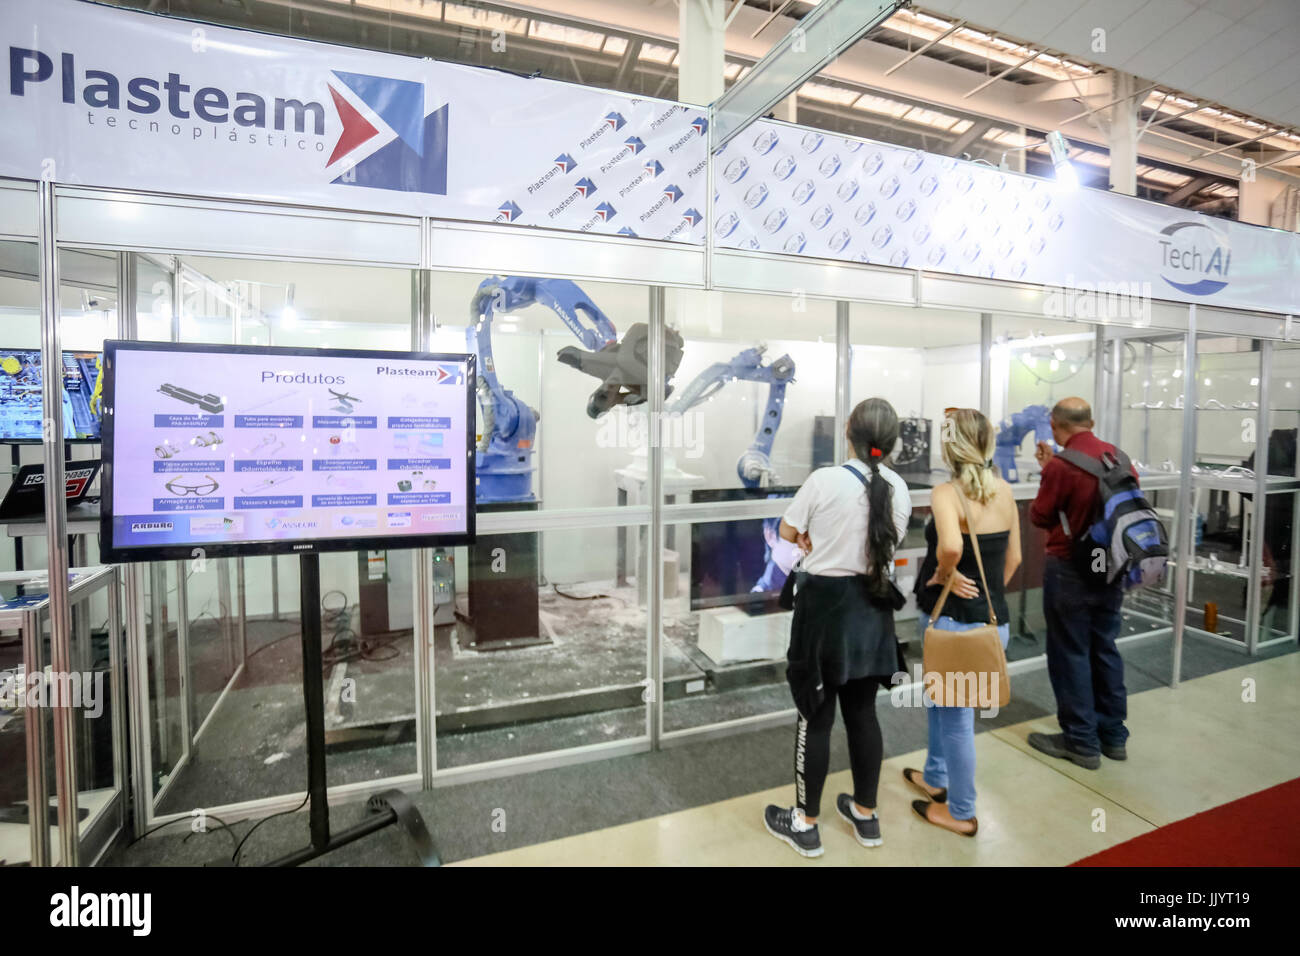 SÃO JOSÉ DOS CAMPOS, SP - 21.07.2017: FEISSECRE FEIRA DE TECNOLOGIA INDÚSTRIAL - The Industry Technology Fair (Feisecre) is in its 19th exhibition of innovative products and services for the industrial sector in São José dos Campos. The main objective of the fair is to offer the opportunity to strengthen relationships and introduce new companies. (Photo: Luis Lima Jr/Fotoarena) Stock Photo